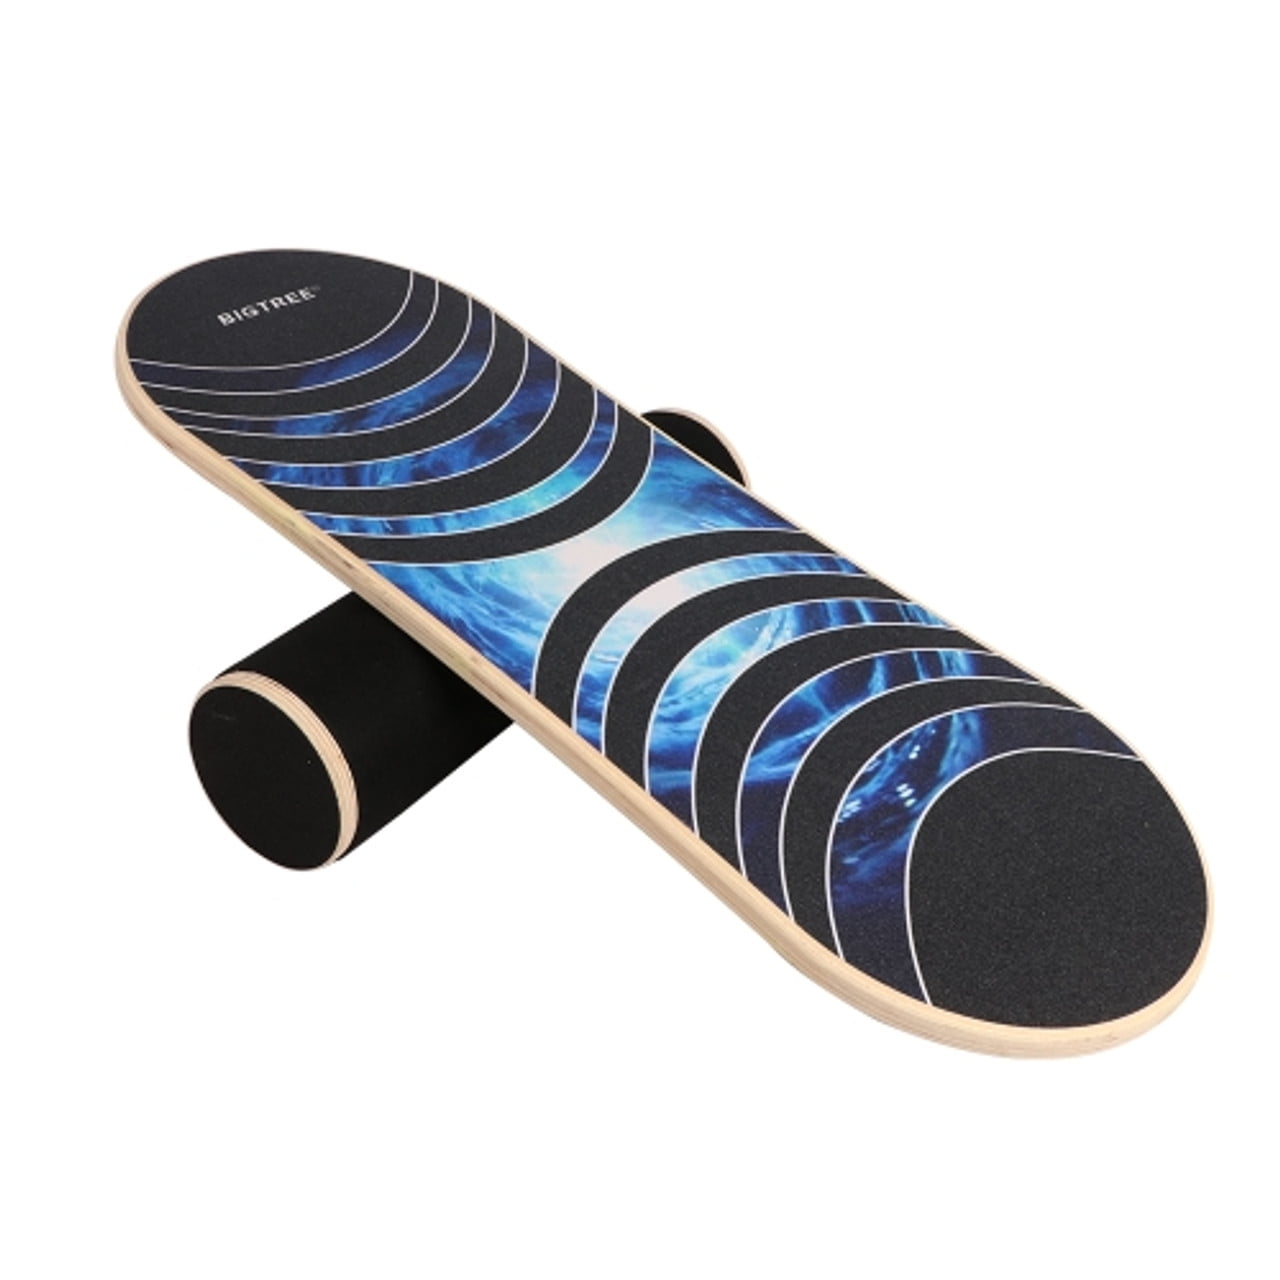 Surfing Wobble Balance Board for Snowboard Challenging Fitness and Sport Training Wooden Balancing Roller Board for Fun Hockey Training & More SSBRIGHT Balance Board Abdominal Core Trainer Ski Skateboard 